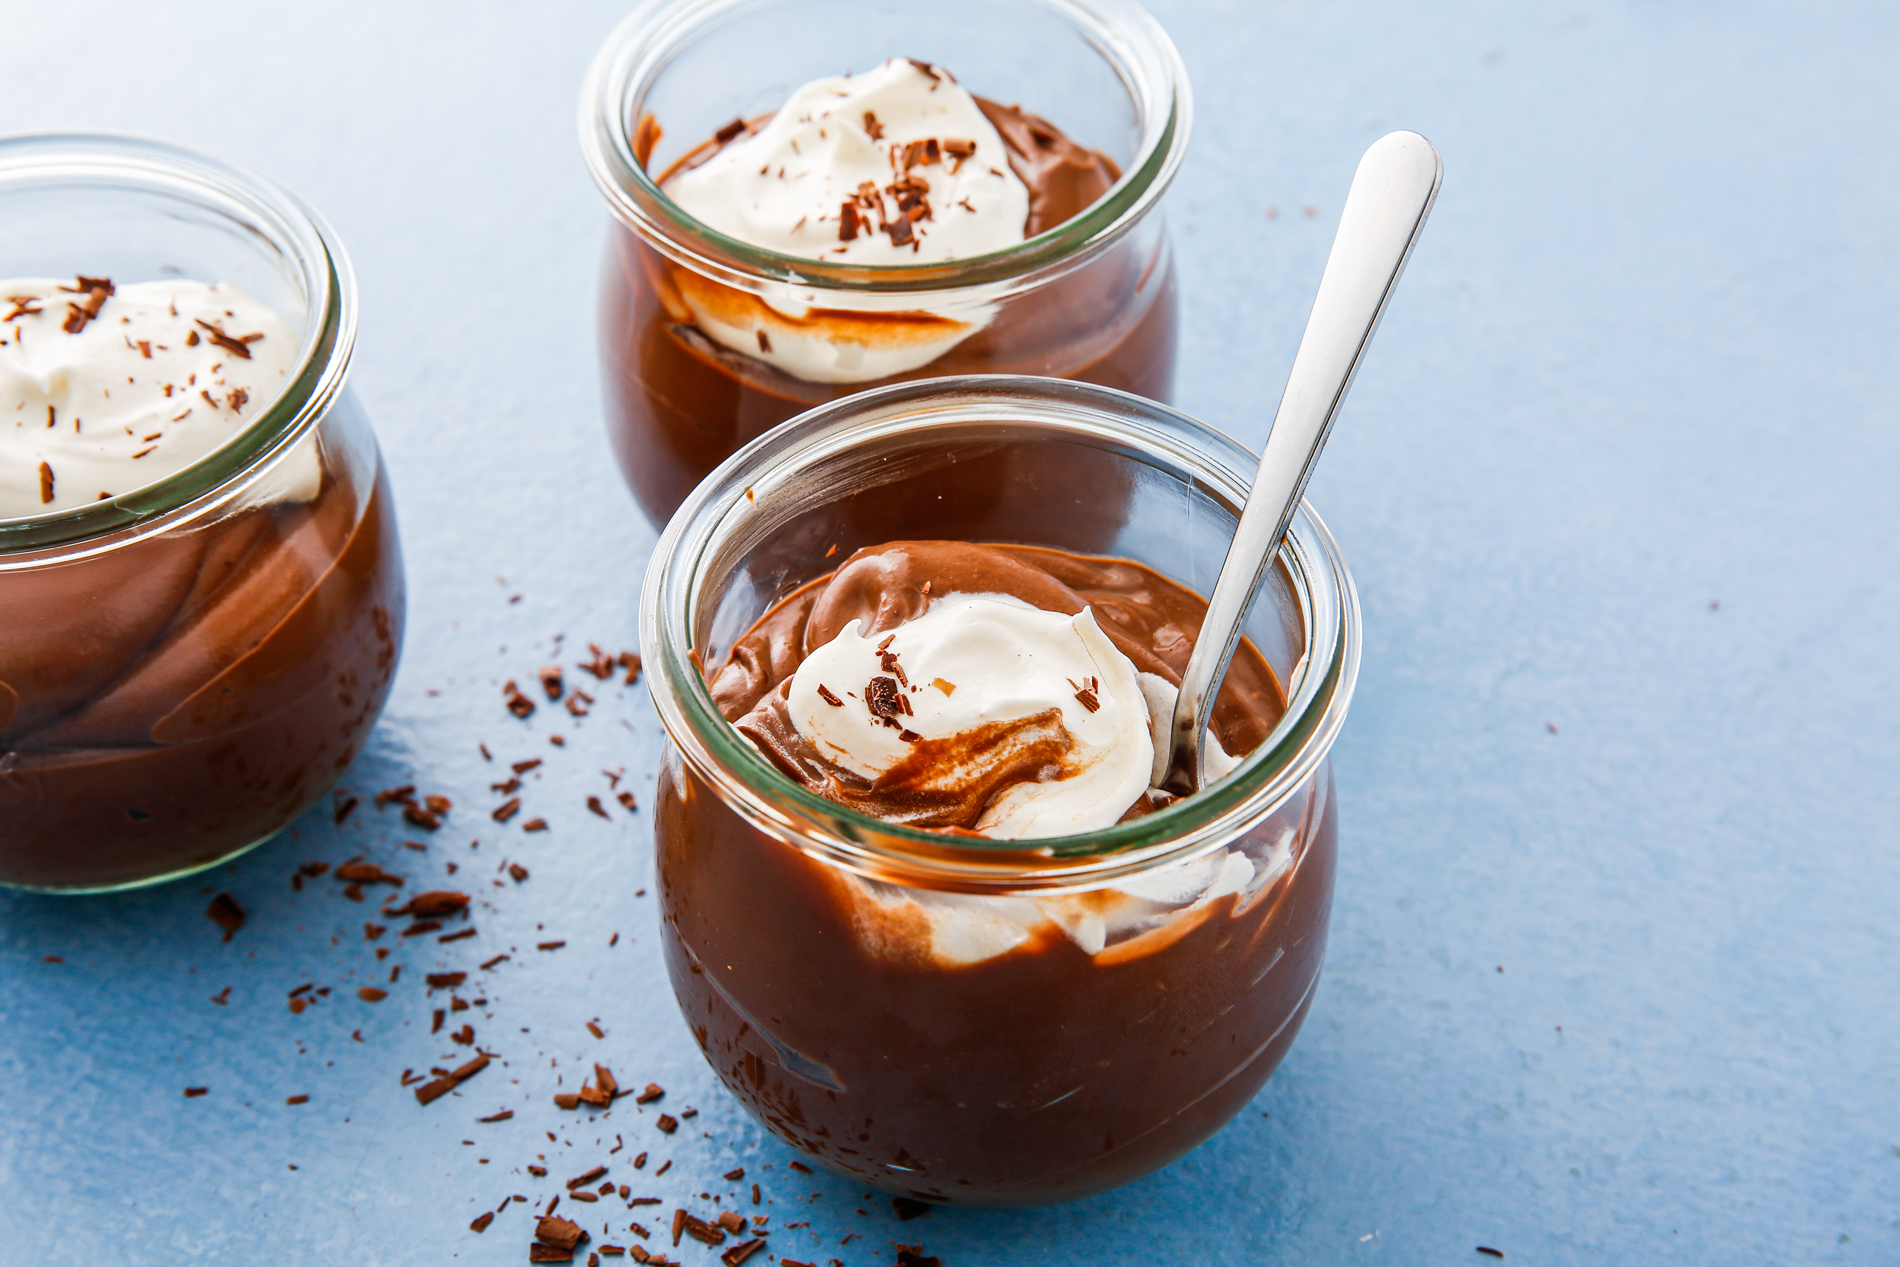 Best Chocolate Pudding Recipe - How To Make Chocolate Pudding